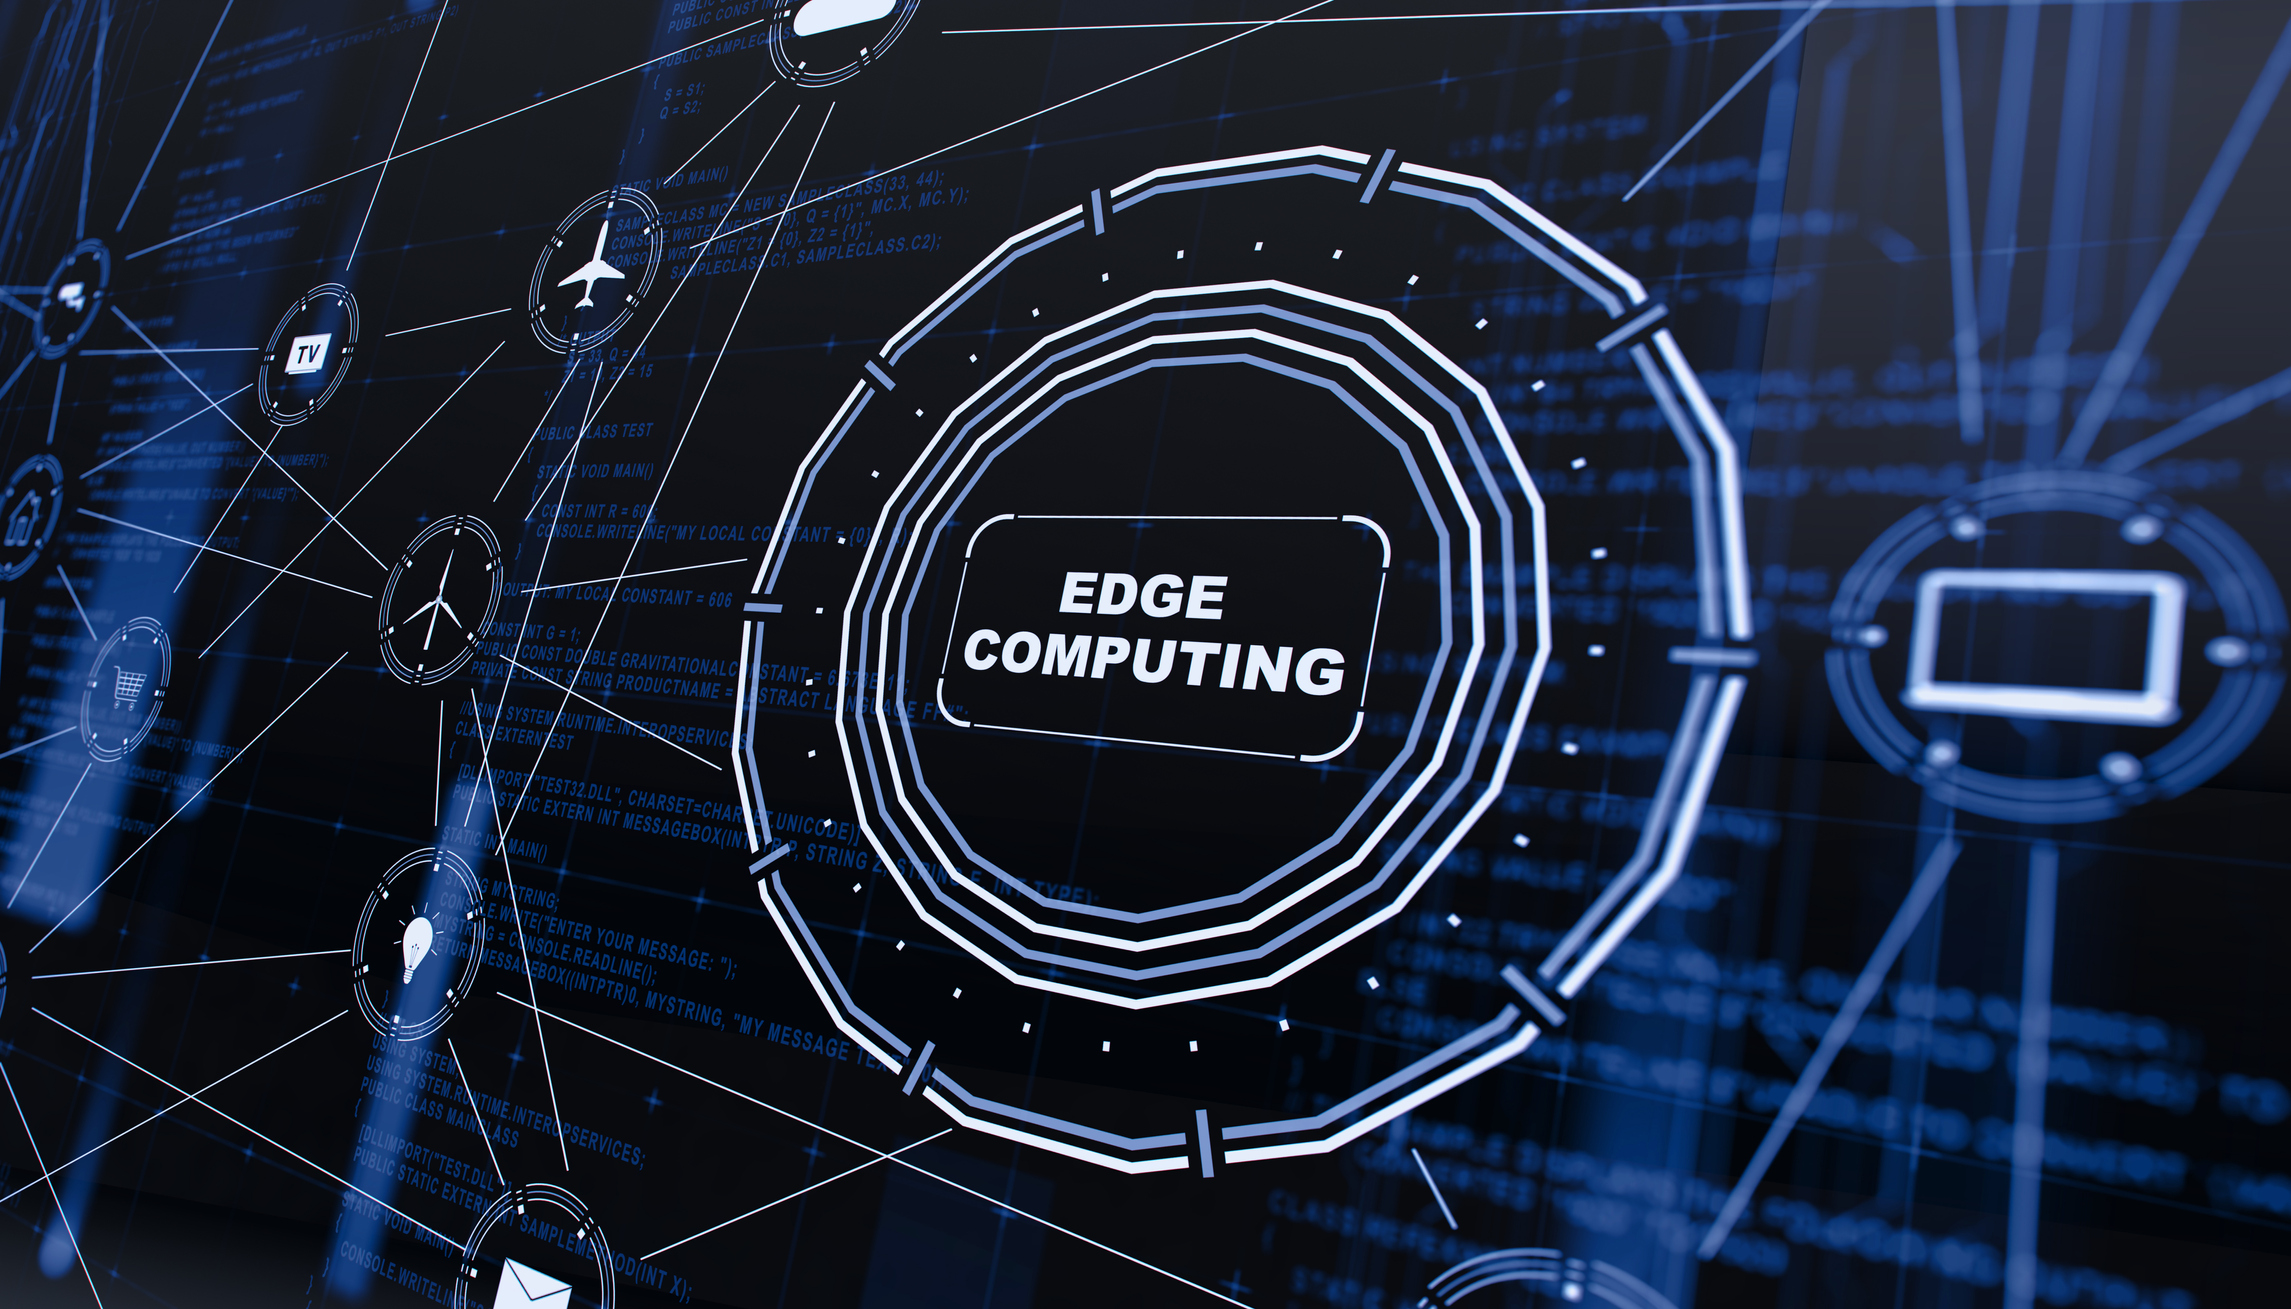 Get Closer to the ‘Edge’ with Micro Data Center Solutions